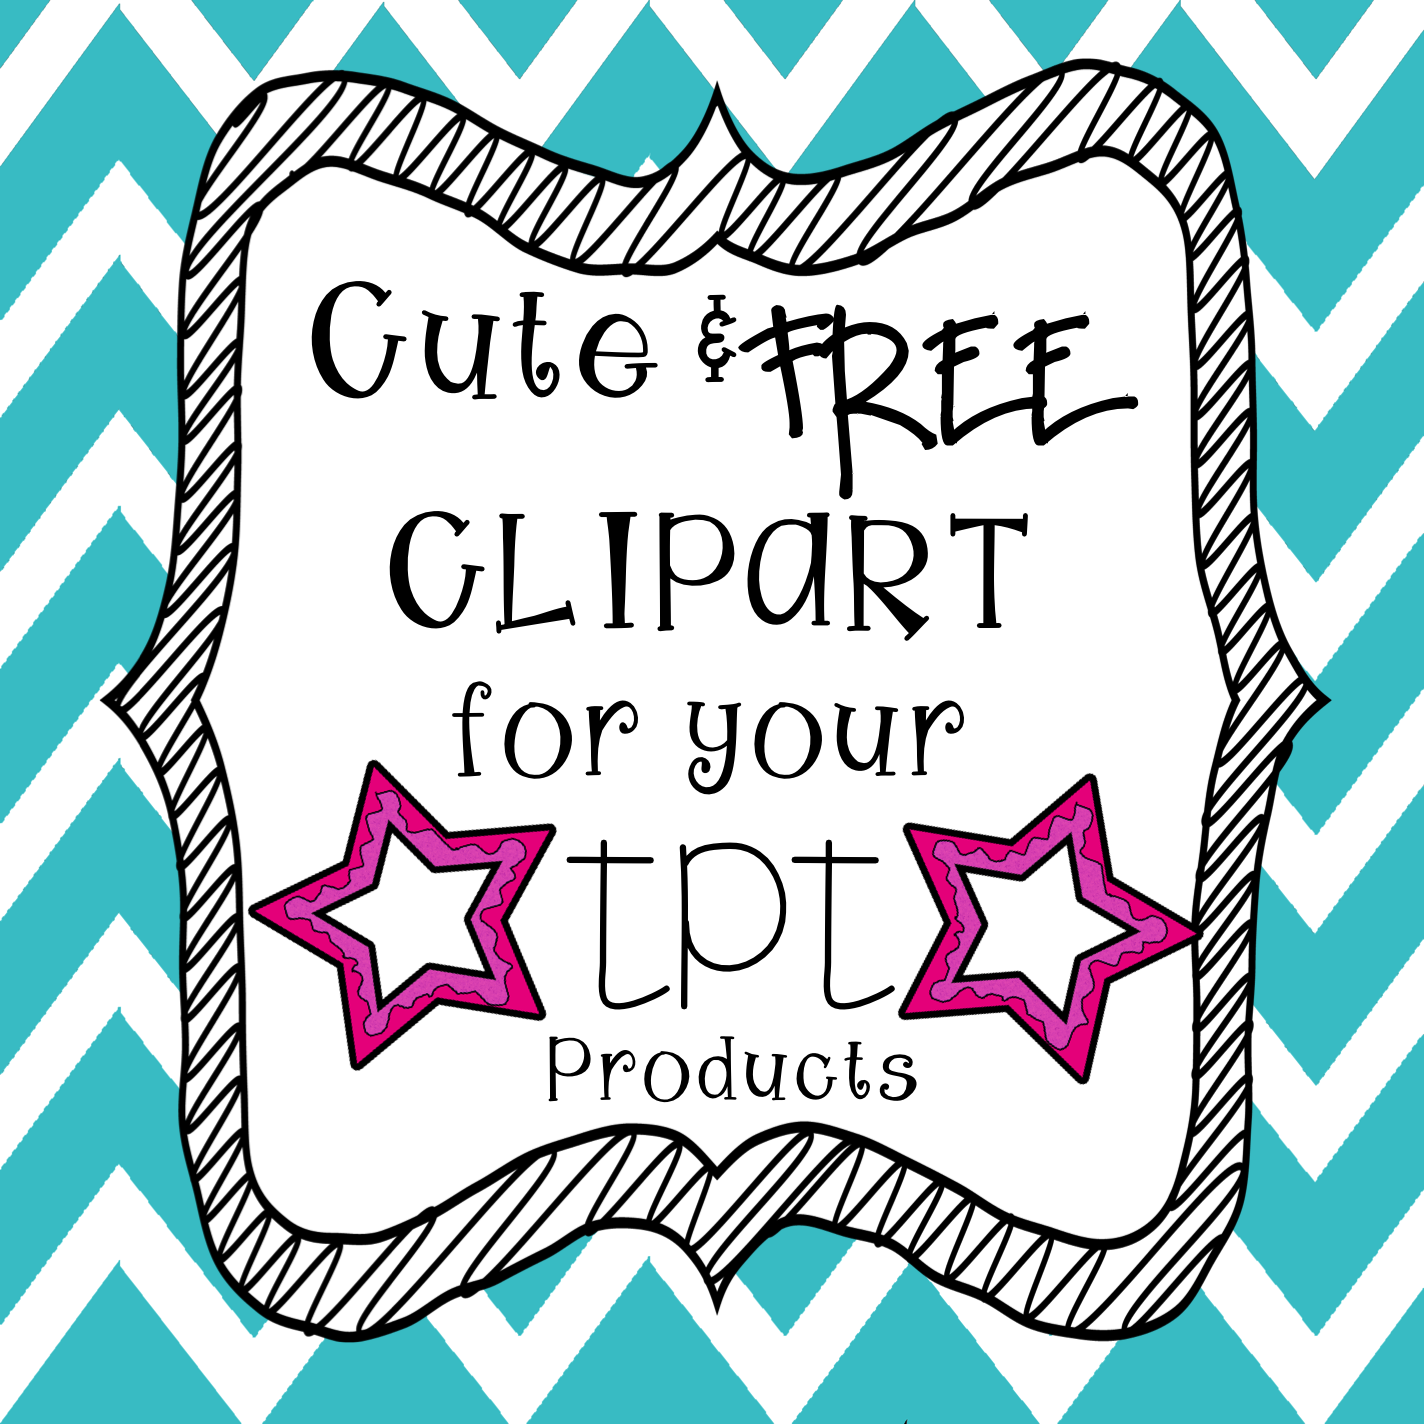 free clip art or graphics - photo #21